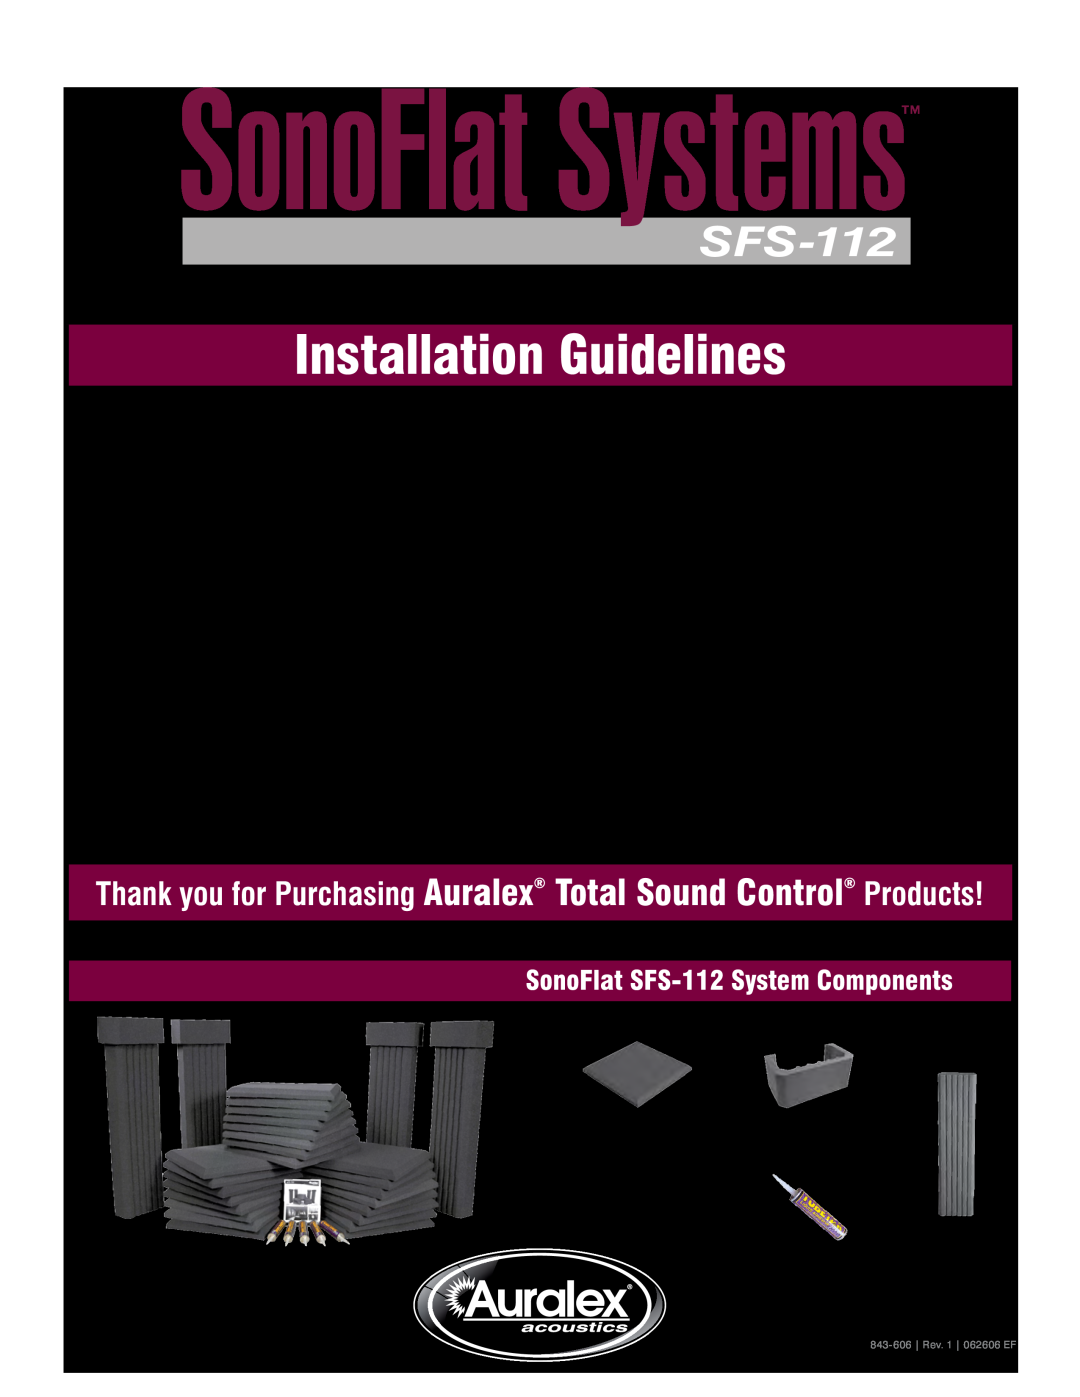 Auralex Acoustics manual SonoFlat Systems, Installation Guidelines, SonoFlat SFS-112System Components 